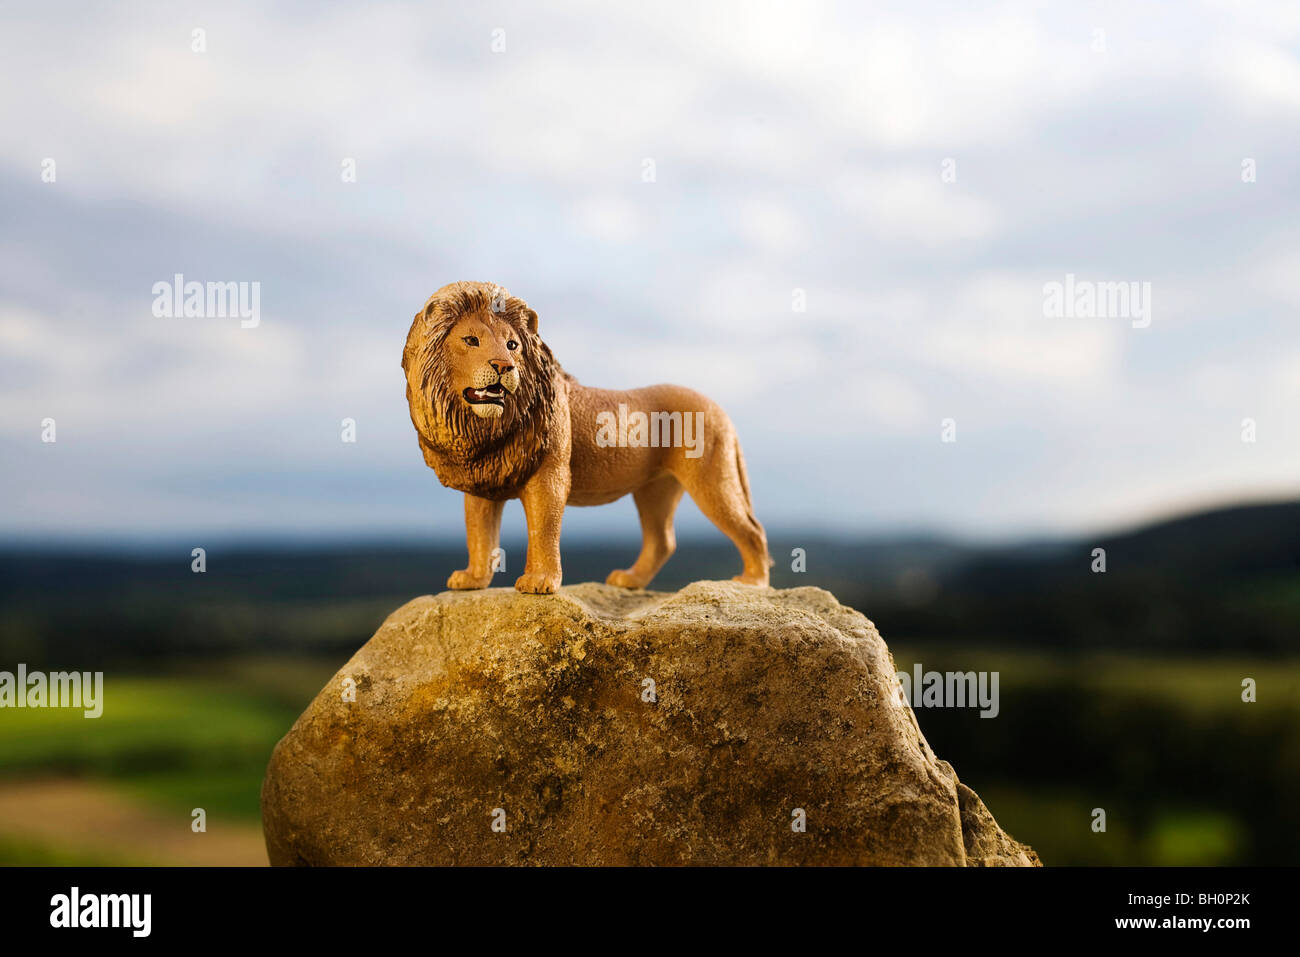 Toy lion standing on a stone in front of clouded sky Stock Photo